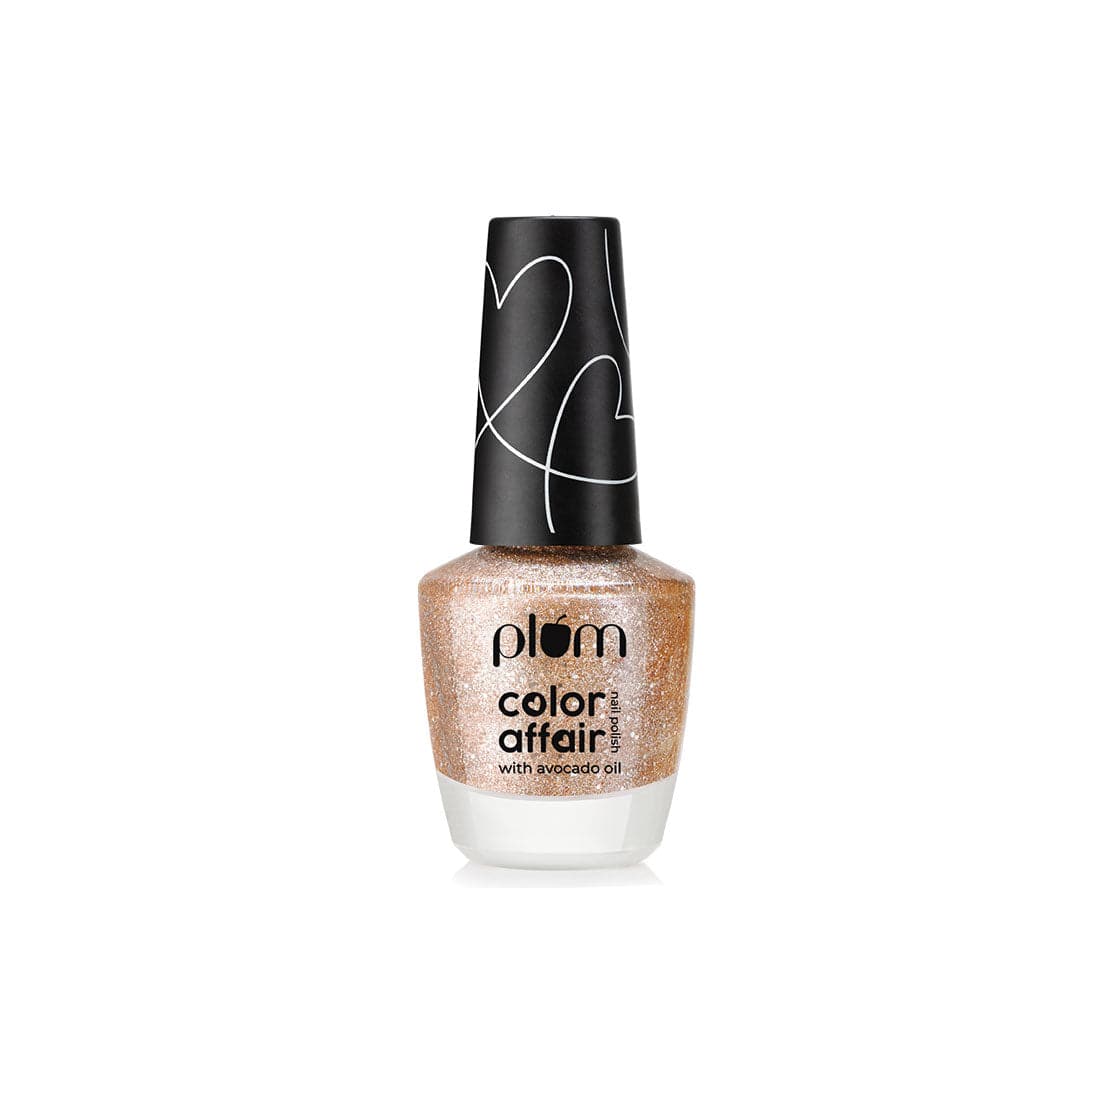 Buy Indie Nails Bling Bling is Free of 12 toxins vegan cruelty-free quick  dry glossy finish chip Golden Glitter Colour shade Nail polish, enamel,  lacquer, paint Liquid: 5 ml Online at Low